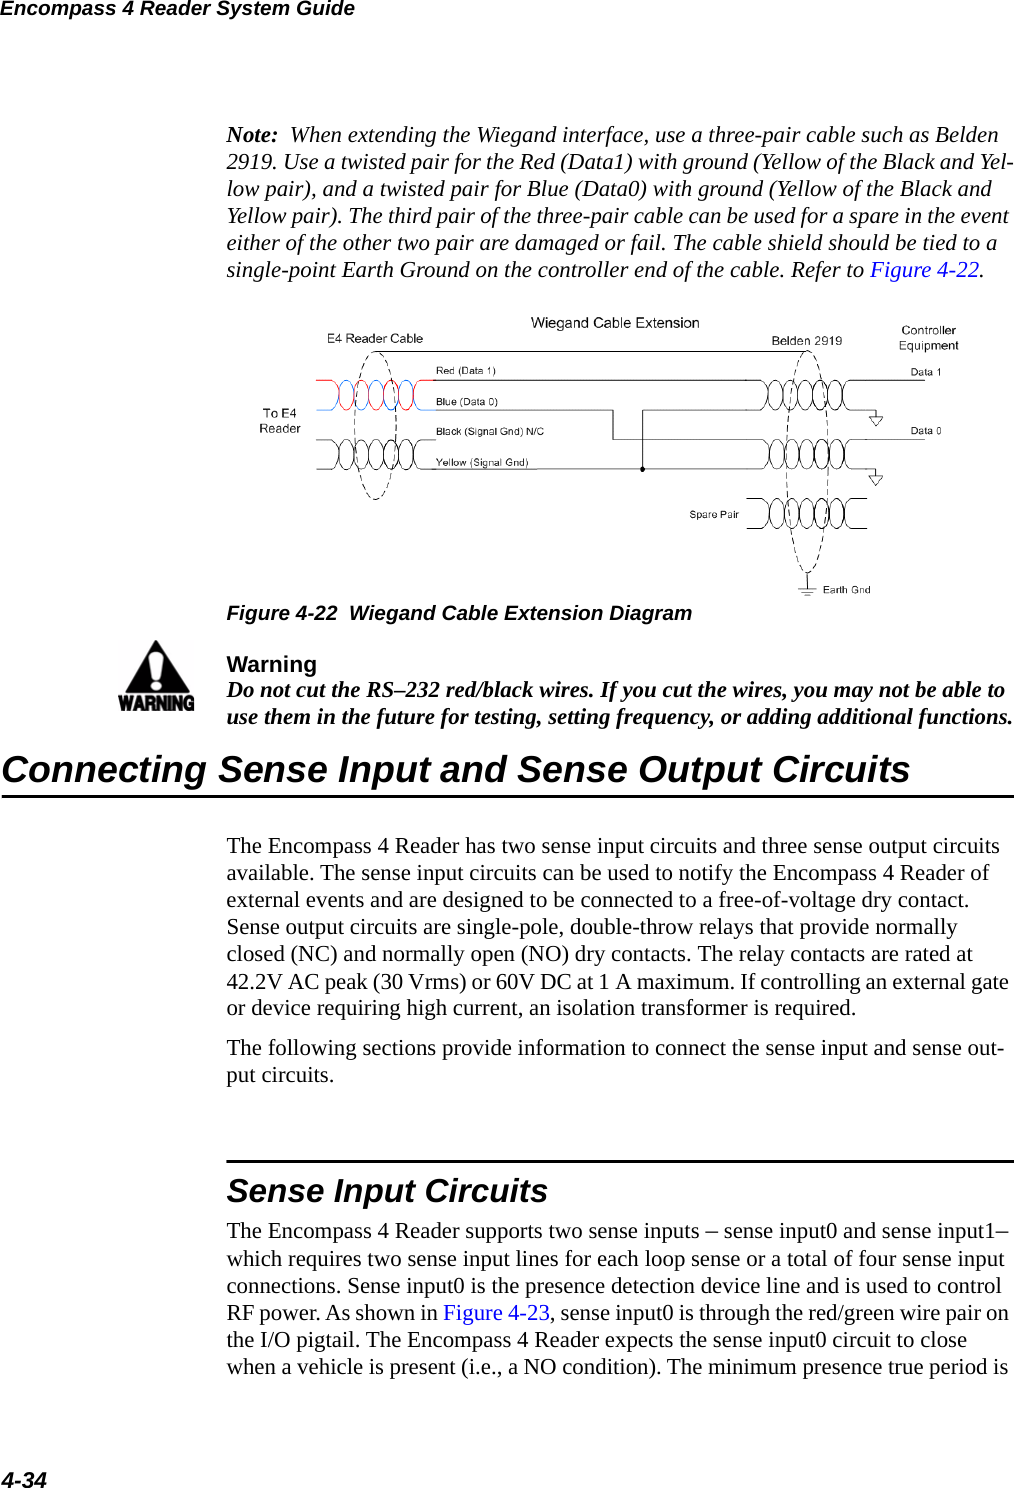 Encompass 4 Reader System Guide4-34Note:  When extending the Wiegand interface, use a three-pair cable such as Belden 2919. Use a twisted pair for the Red (Data1) with ground (Yellow of the Black and Yel-low pair), and a twisted pair for Blue (Data0) with ground (Yellow of the Black and Yellow pair). The third pair of the three-pair cable can be used for a spare in the event either of the other two pair are damaged or fail. The cable shield should be tied to a single-point Earth Ground on the controller end of the cable. Refer to Figure 4-22.  Figure 4-22  Wiegand Cable Extension DiagramWarningDo not cut the RS–232 red/black wires. If you cut the wires, you may not be able to use them in the future for testing, setting frequency, or adding additional functions.Connecting Sense Input and Sense Output CircuitsThe Encompass 4 Reader has two sense input circuits and three sense output circuits available. The sense input circuits can be used to notify the Encompass 4 Reader of external events and are designed to be connected to a free-of-voltage dry contact. Sense output circuits are single-pole, double-throw relays that provide normally closed (NC) and normally open (NO) dry contacts. The relay contacts are rated at 42.2V AC peak (30 Vrms) or 60V DC at 1 A maximum. If controlling an external gate or device requiring high current, an isolation transformer is required.The following sections provide information to connect the sense input and sense out-put circuits.Sense Input CircuitsThe Encompass 4 Reader supports two sense inputs – sense input0 and sense input1– which requires two sense input lines for each loop sense or a total of four sense input connections. Sense input0 is the presence detection device line and is used to control RF power. As shown in Figure 4-23, sense input0 is through the red/green wire pair on the I/O pigtail. The Encompass 4 Reader expects the sense input0 circuit to close when a vehicle is present (i.e., a NO condition). The minimum presence true period is 